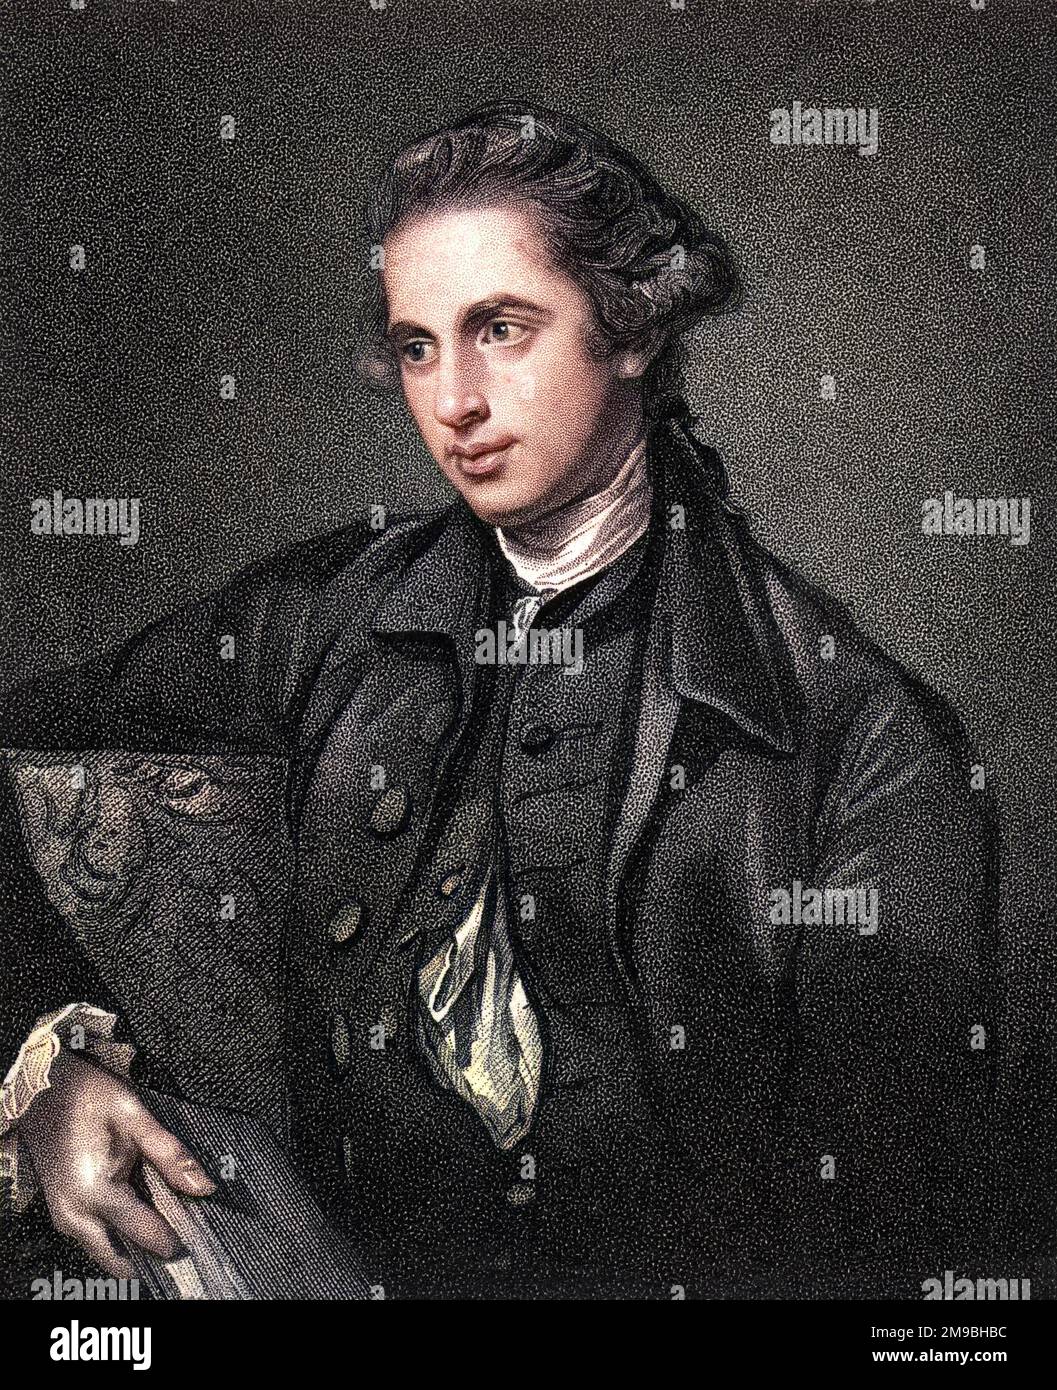 GEORGE HARDINGE (1743 - 1816), writer and judge, MP for Old Sarum, most notorious of the 'rotten boroughs'. Stock Photo